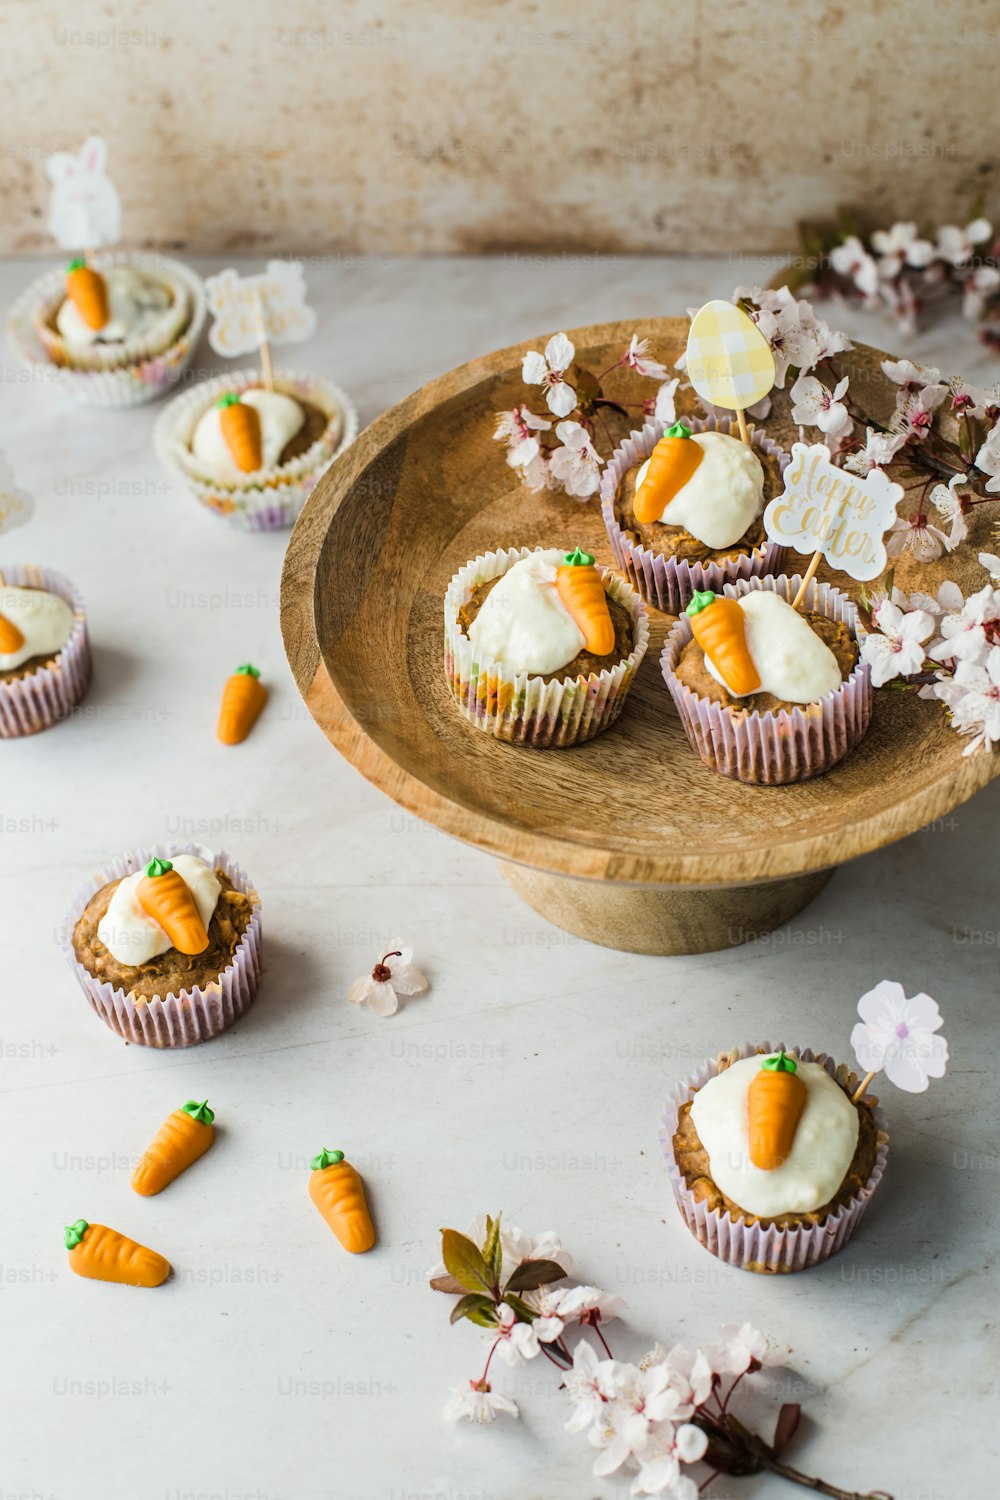 a plate of cupcakes with frosting and carrots